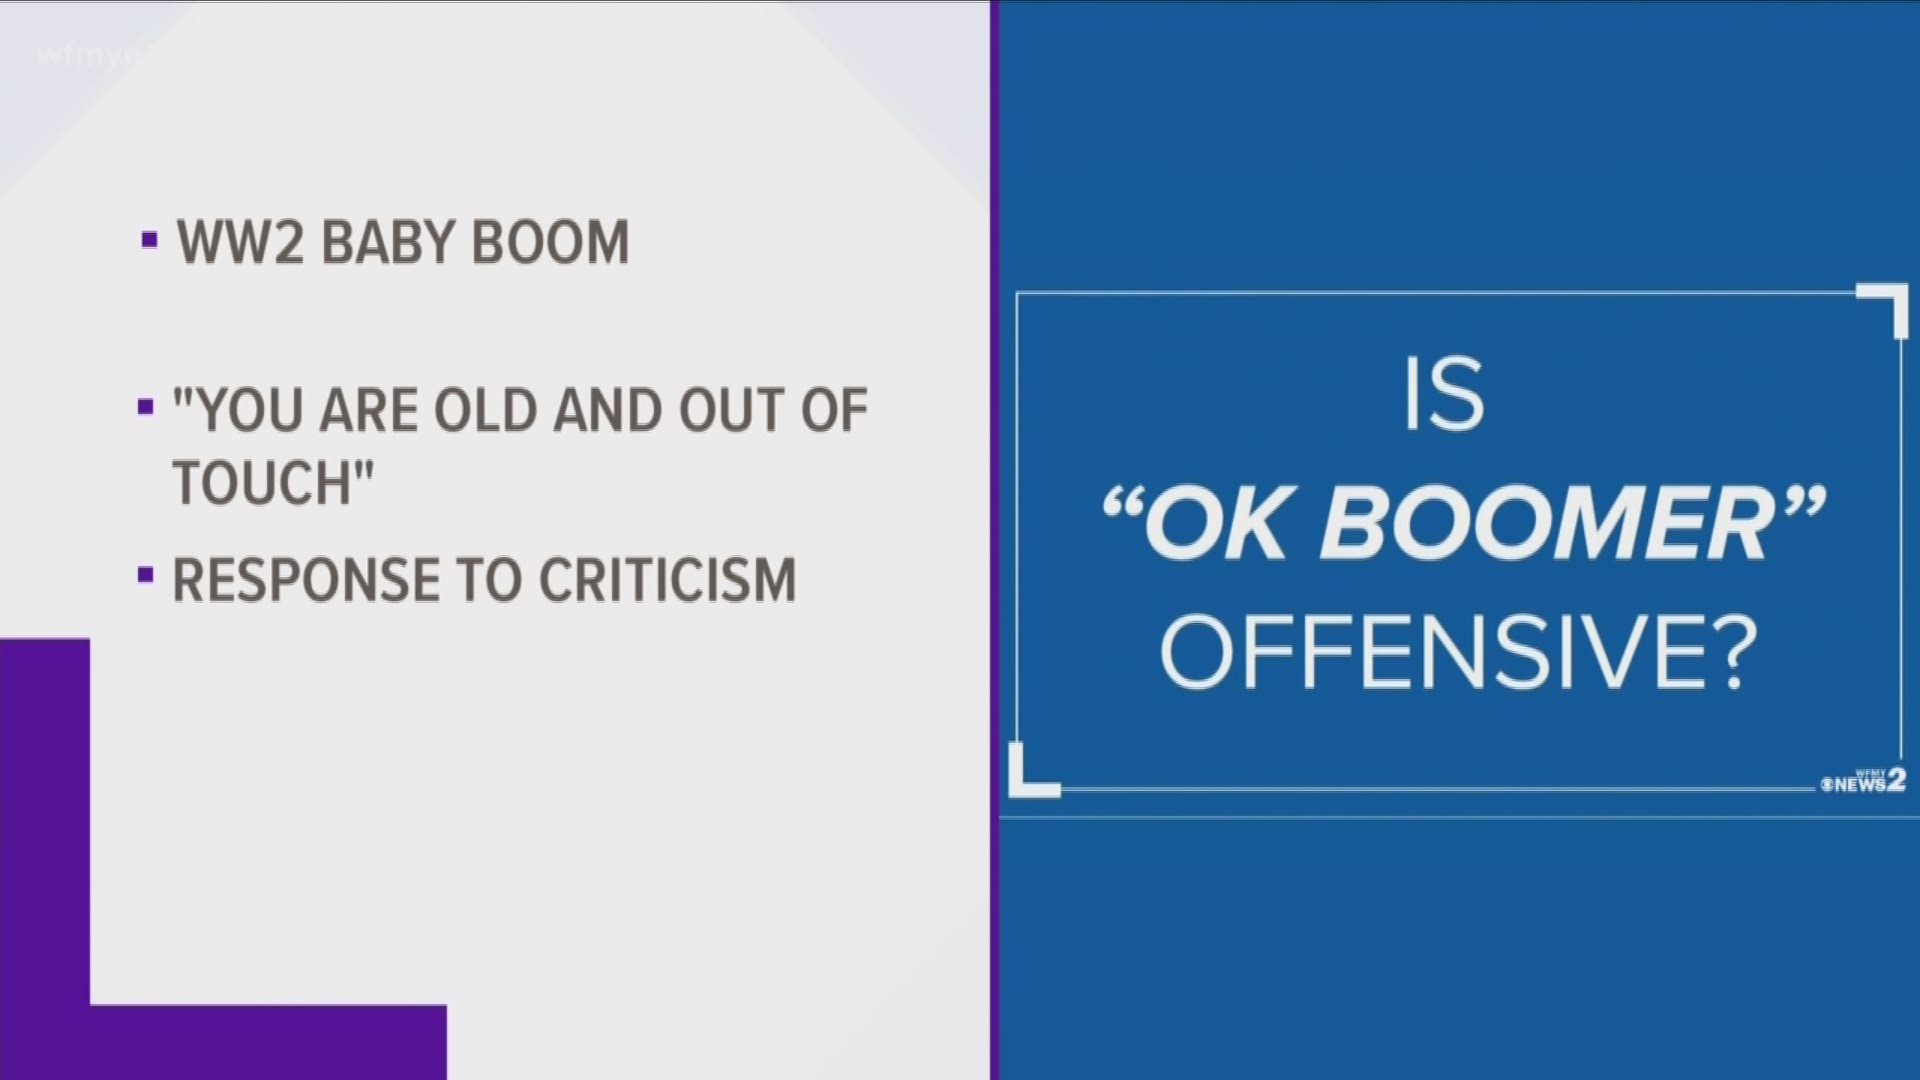 Social media experts say "ok boomer" started as a jab on the app Tik Tok. It essentially means "You are old and out of touch."